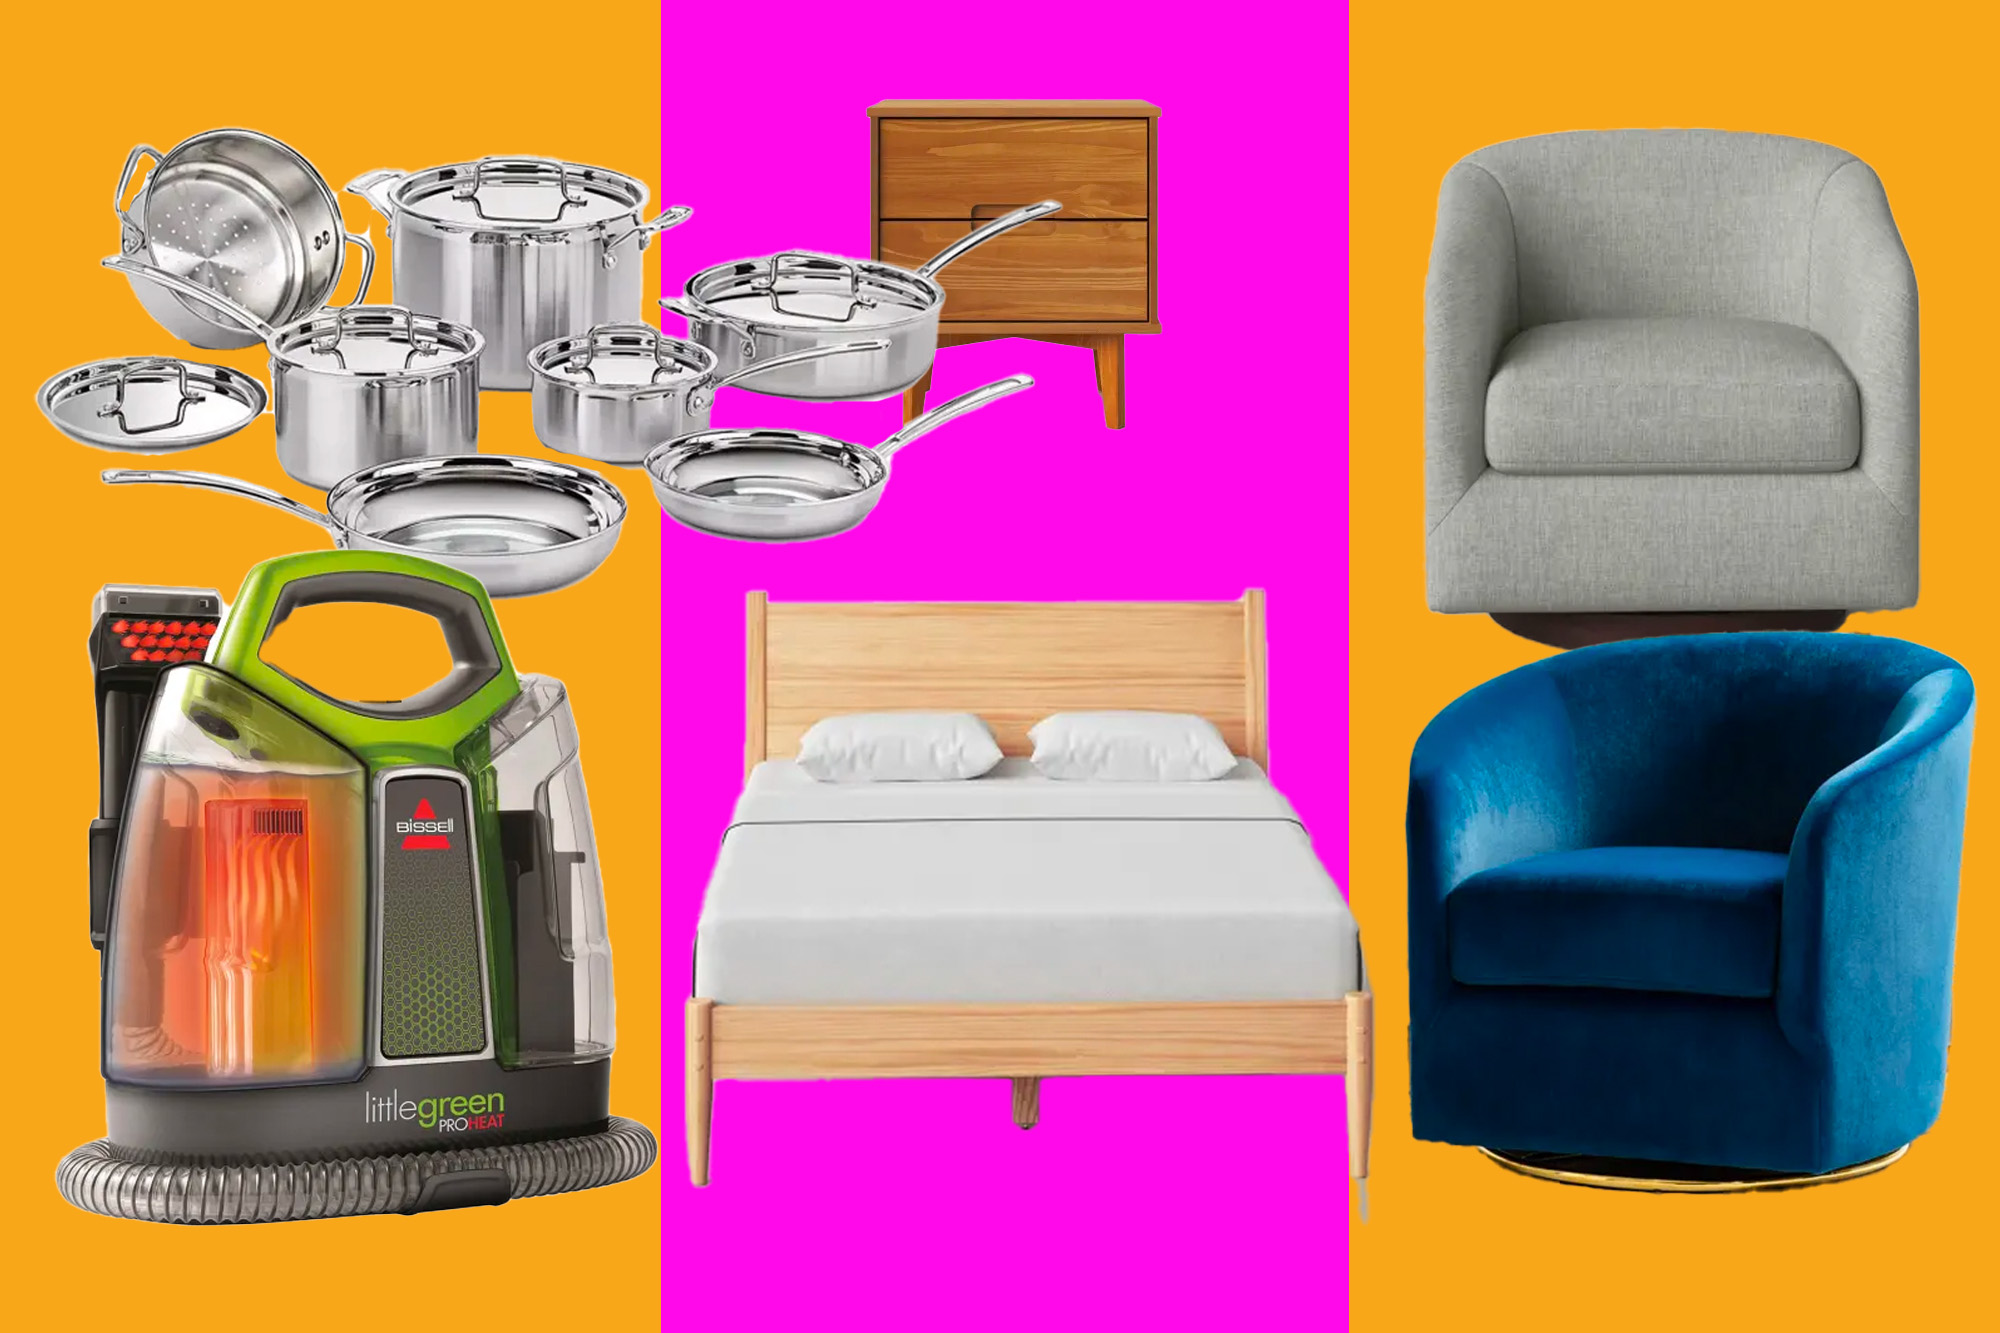 Collage of furniture and appliances from Wayfair72feat_478692